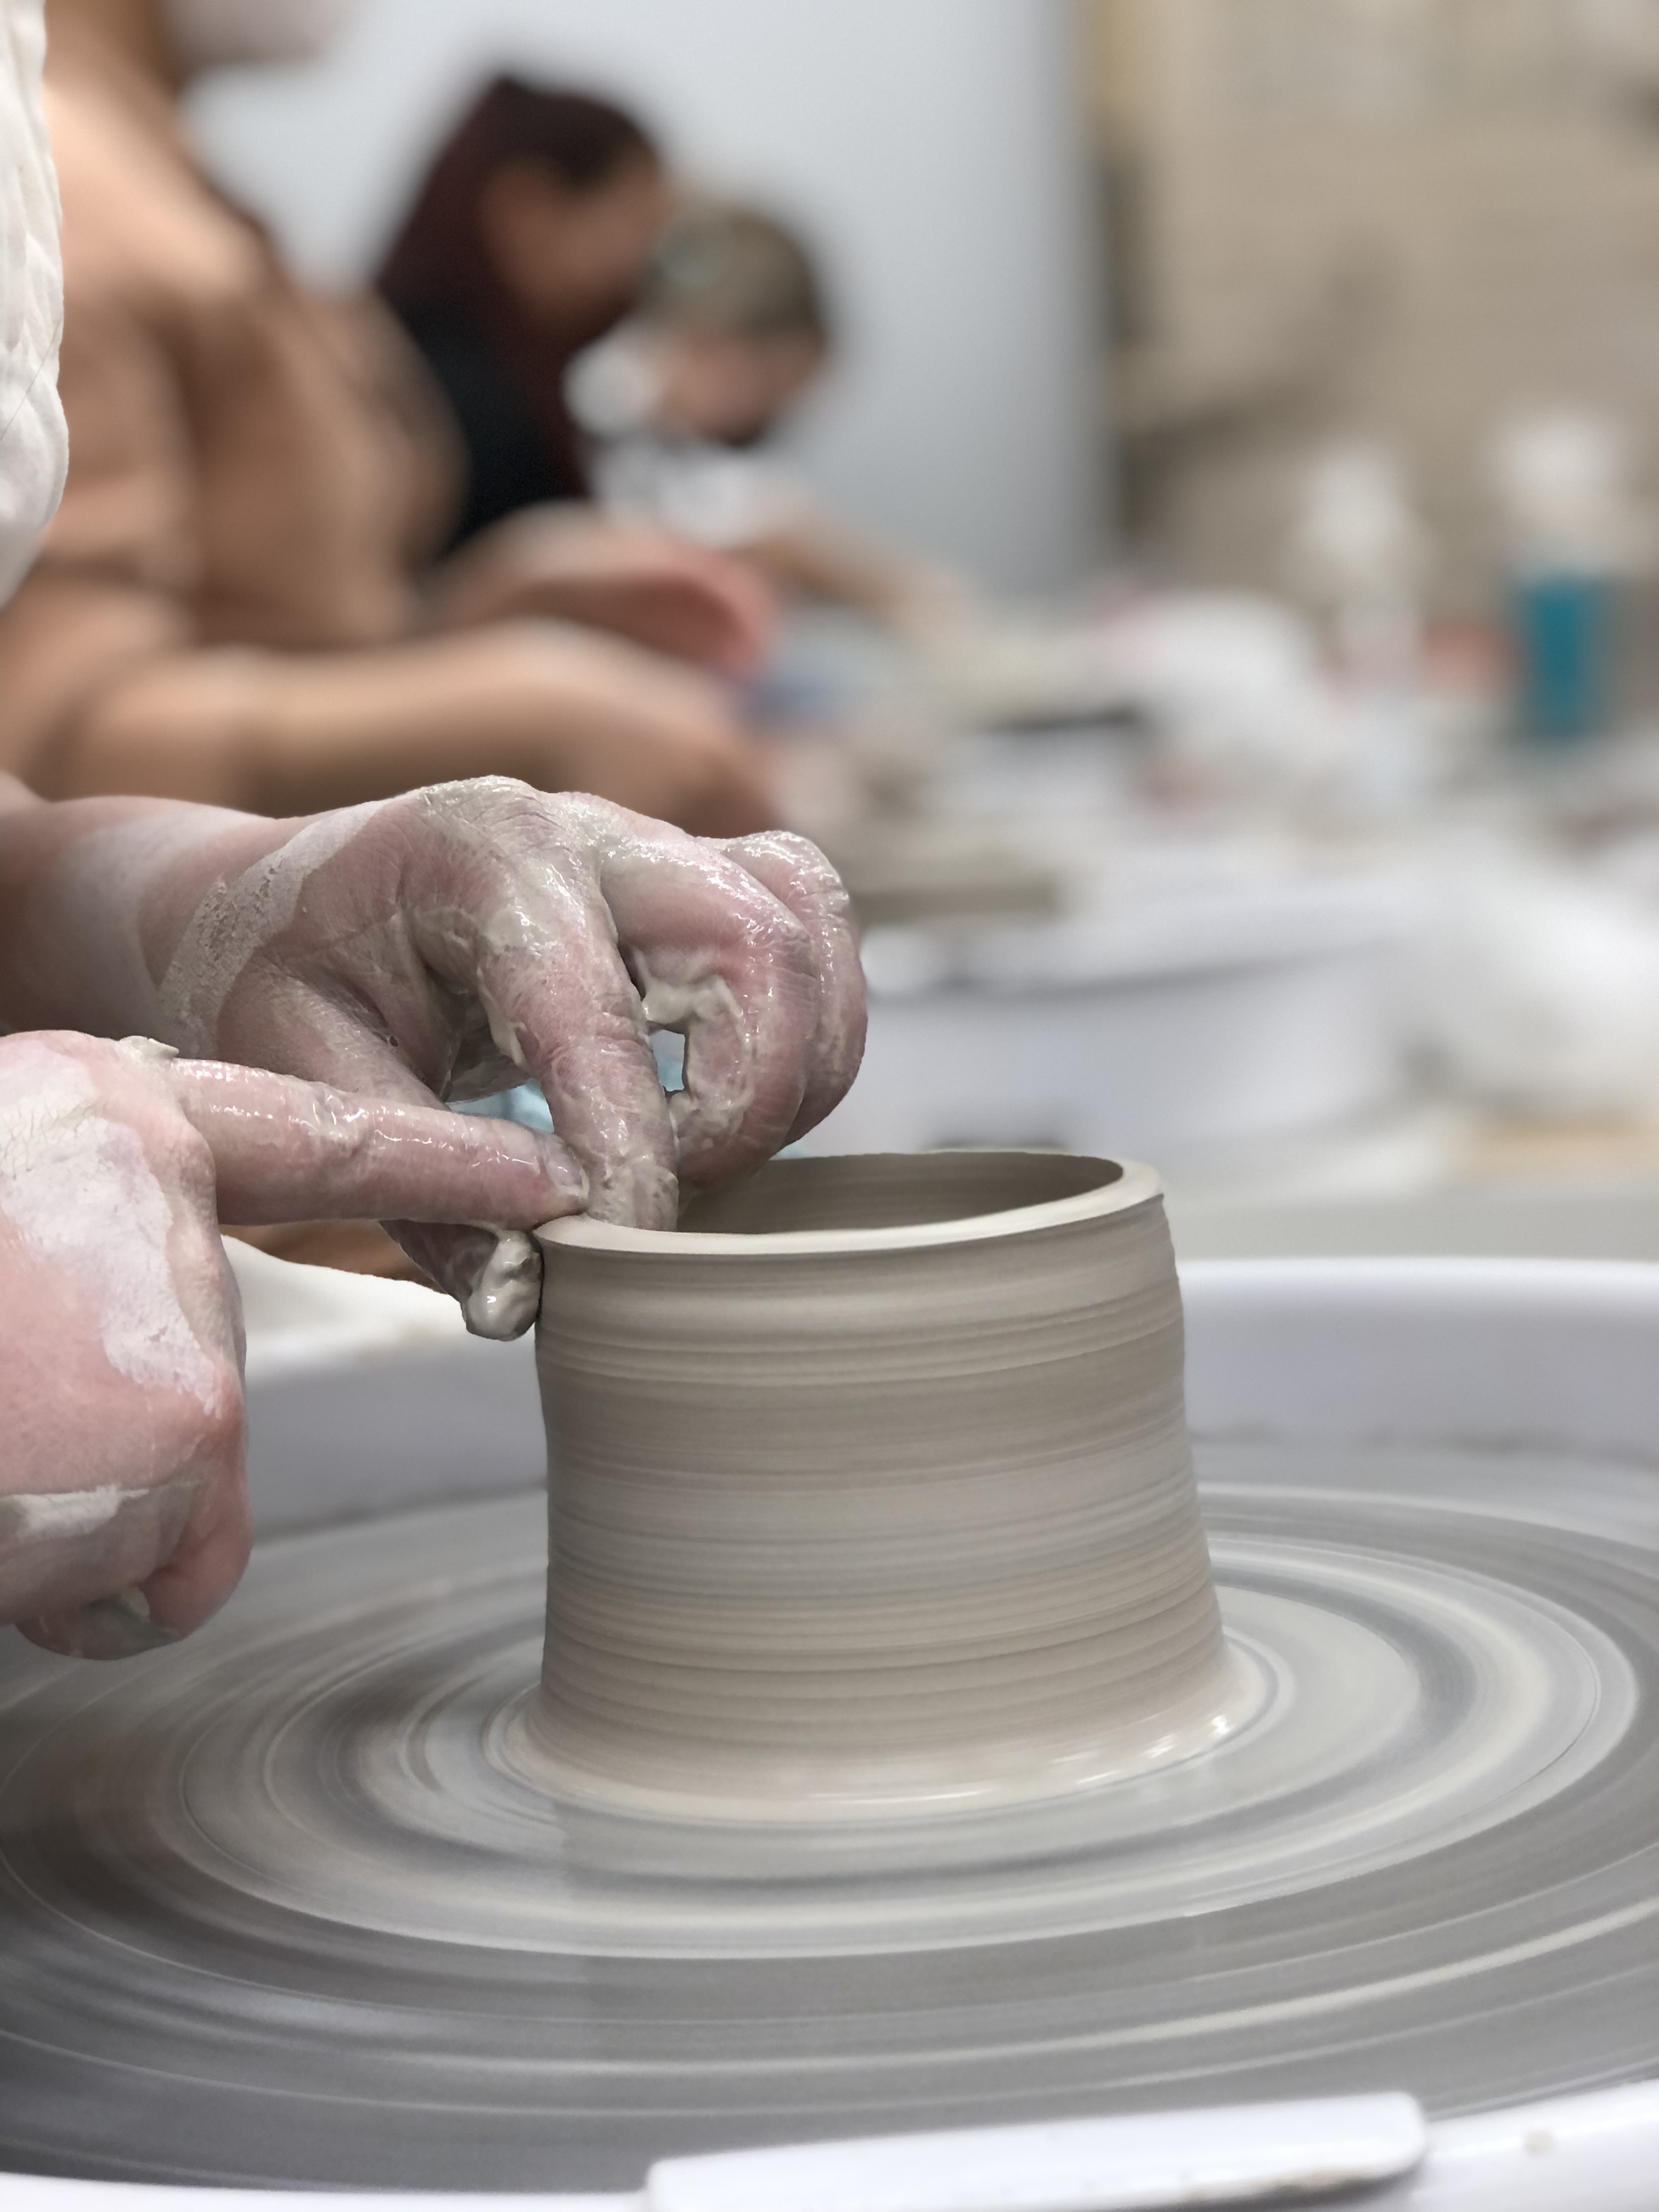 Hands work on the throwing wheel shaping wet clay into a vessel